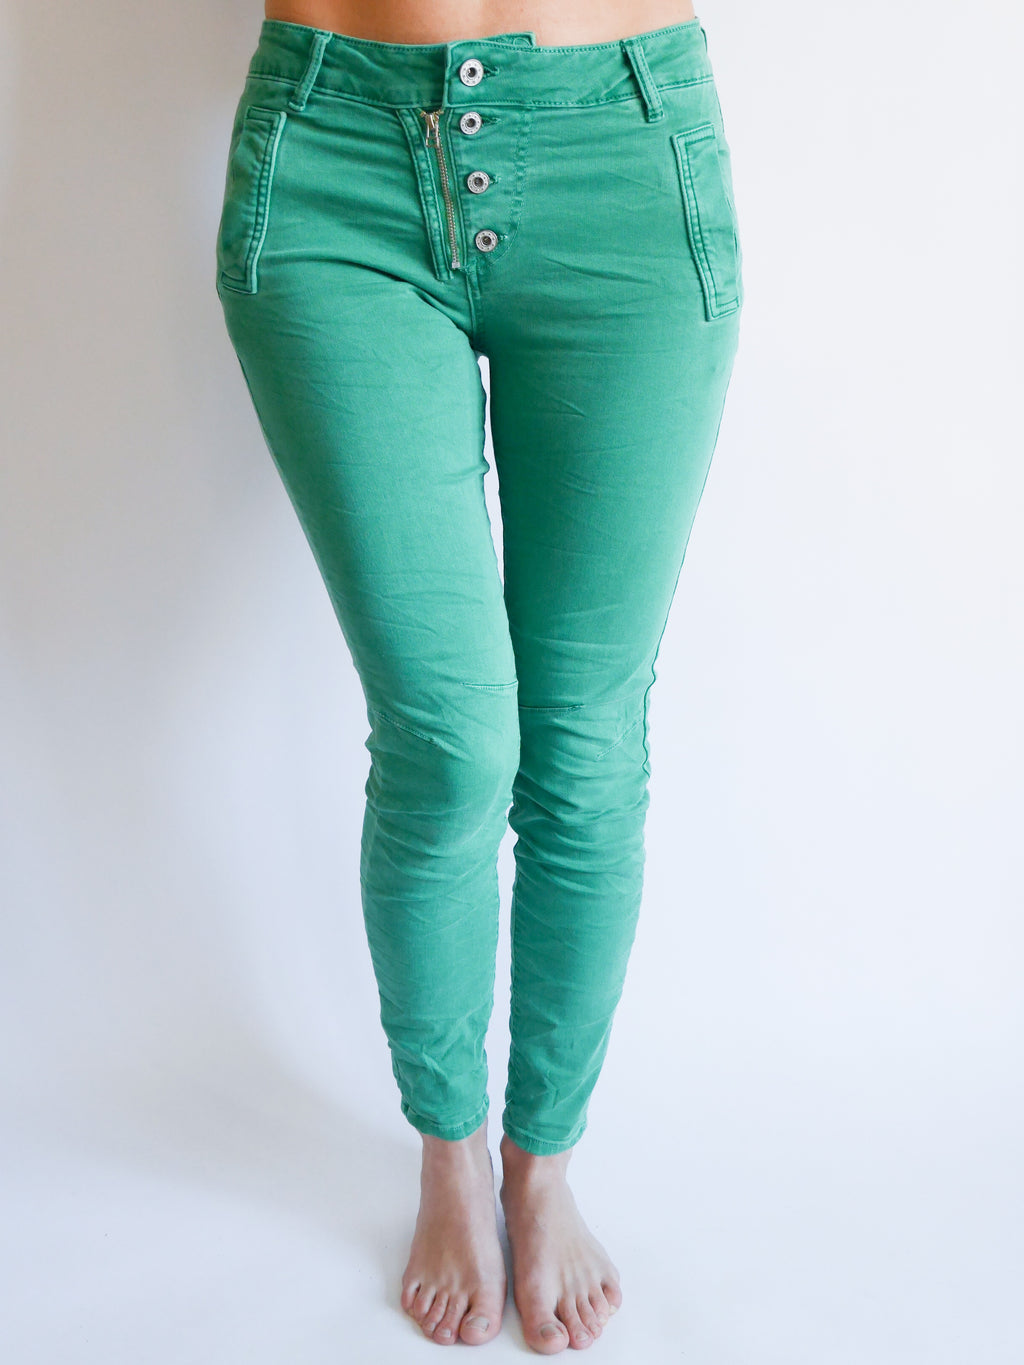 Melly & Co Emerald 4 Button Hole Detail Jeans